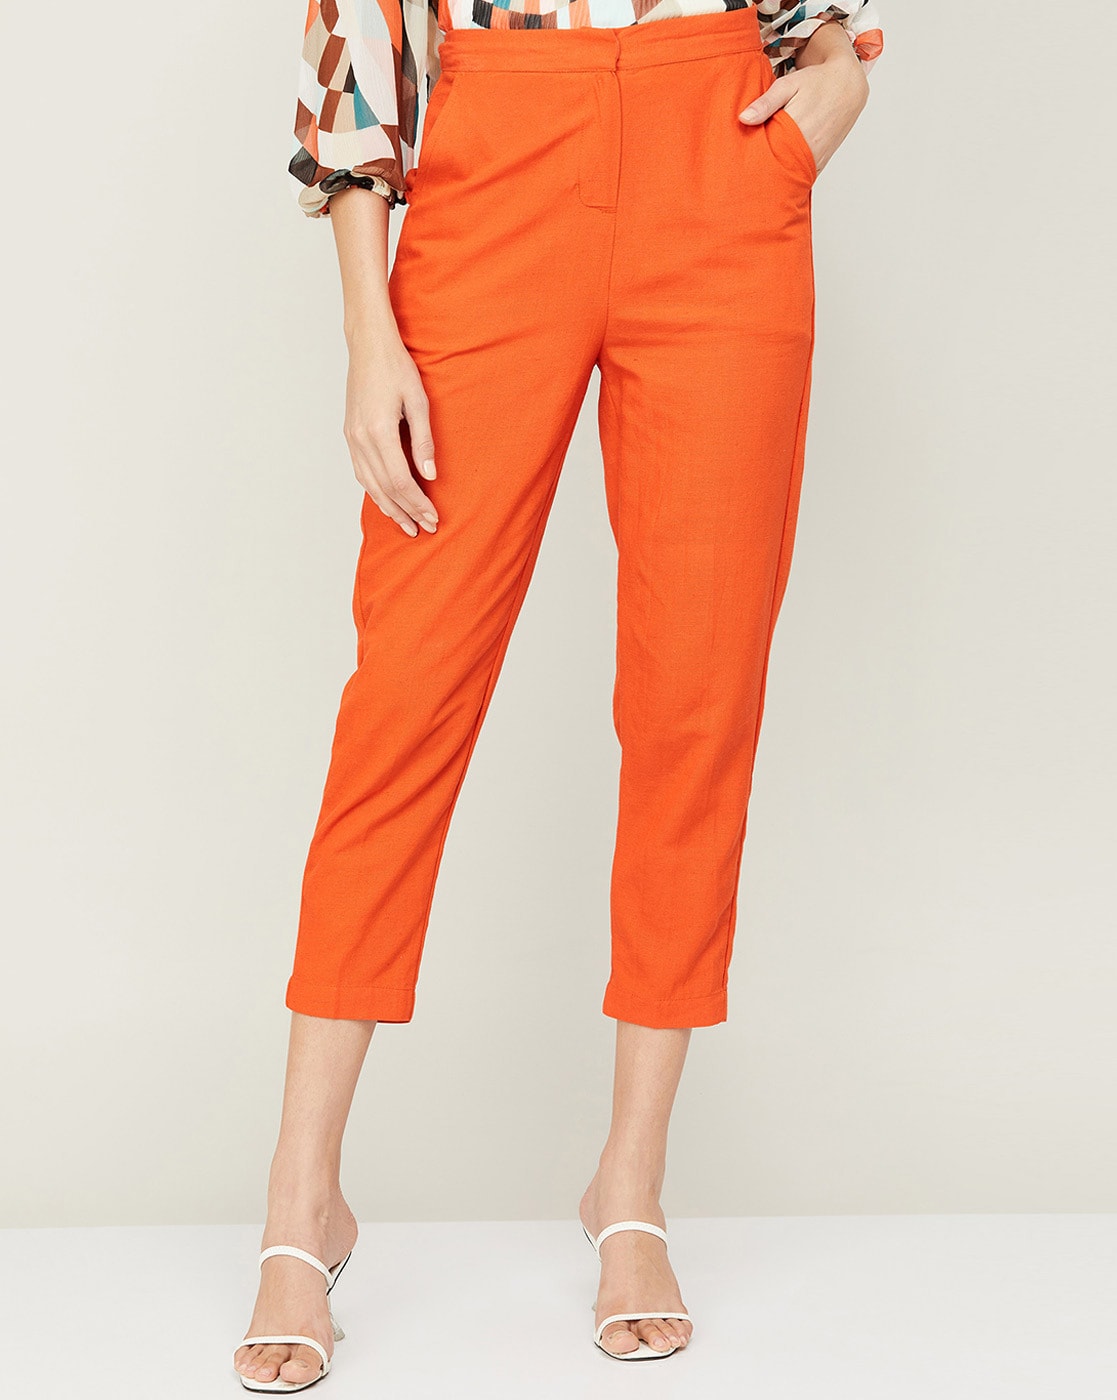 Womens Trousers Buy Ladies Pants Online at Best Prices in India  STREET  NINE FASHIONS